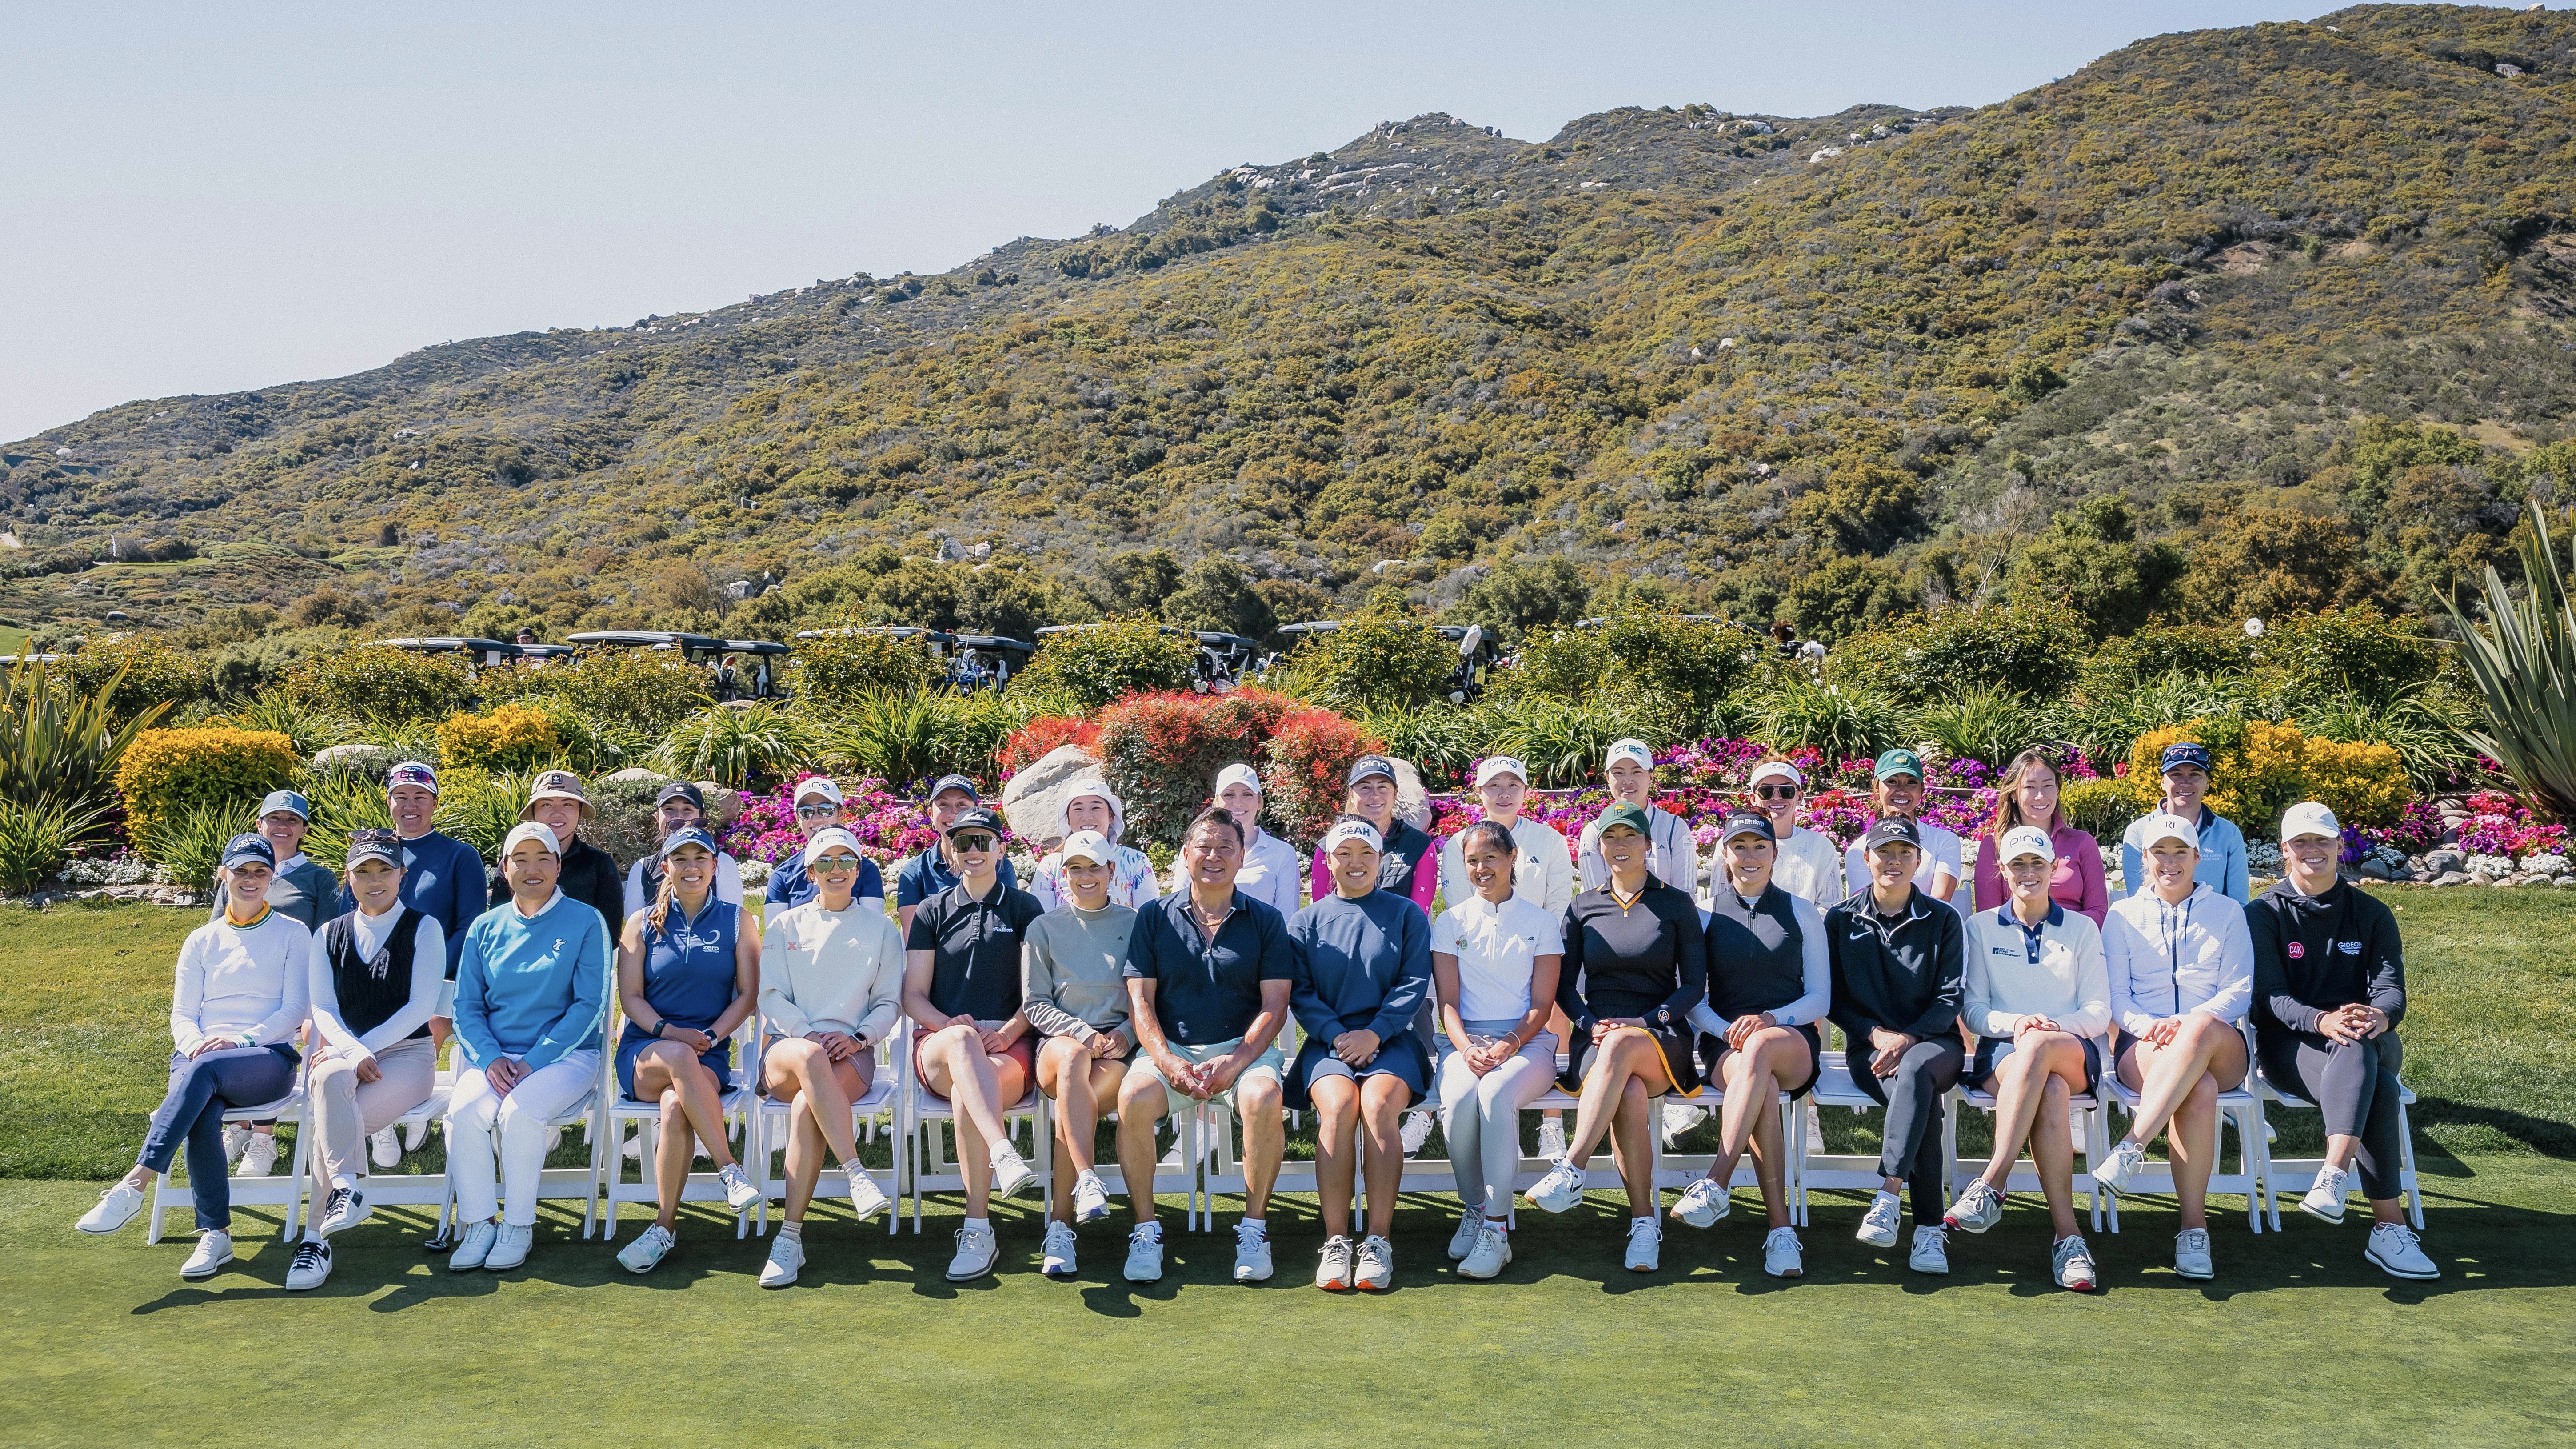 The 30 pros competing in CM's 17th annual Pro-Am tournament pose for a photo on Journey at Pechanga golf course.